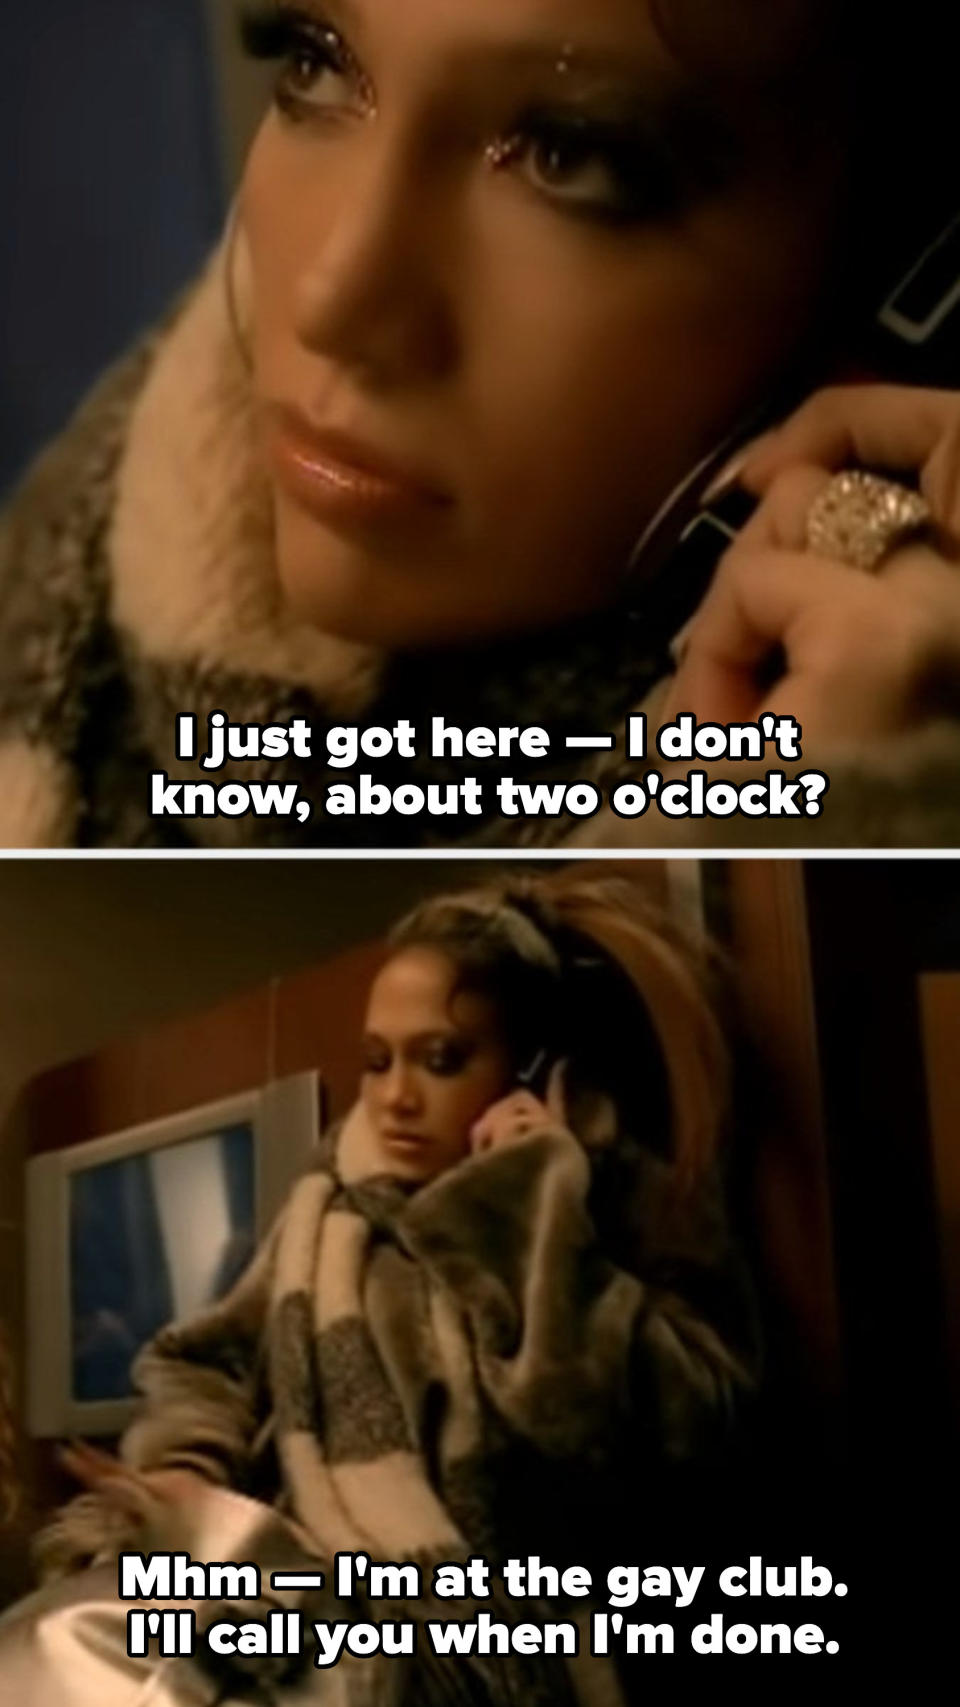 Jennifer Lopez in a bathroom on the phone, saying: "I just got here — I don't know, about two o'clock? Mhm — I'm at the gay club. I'll call you when I'm done"